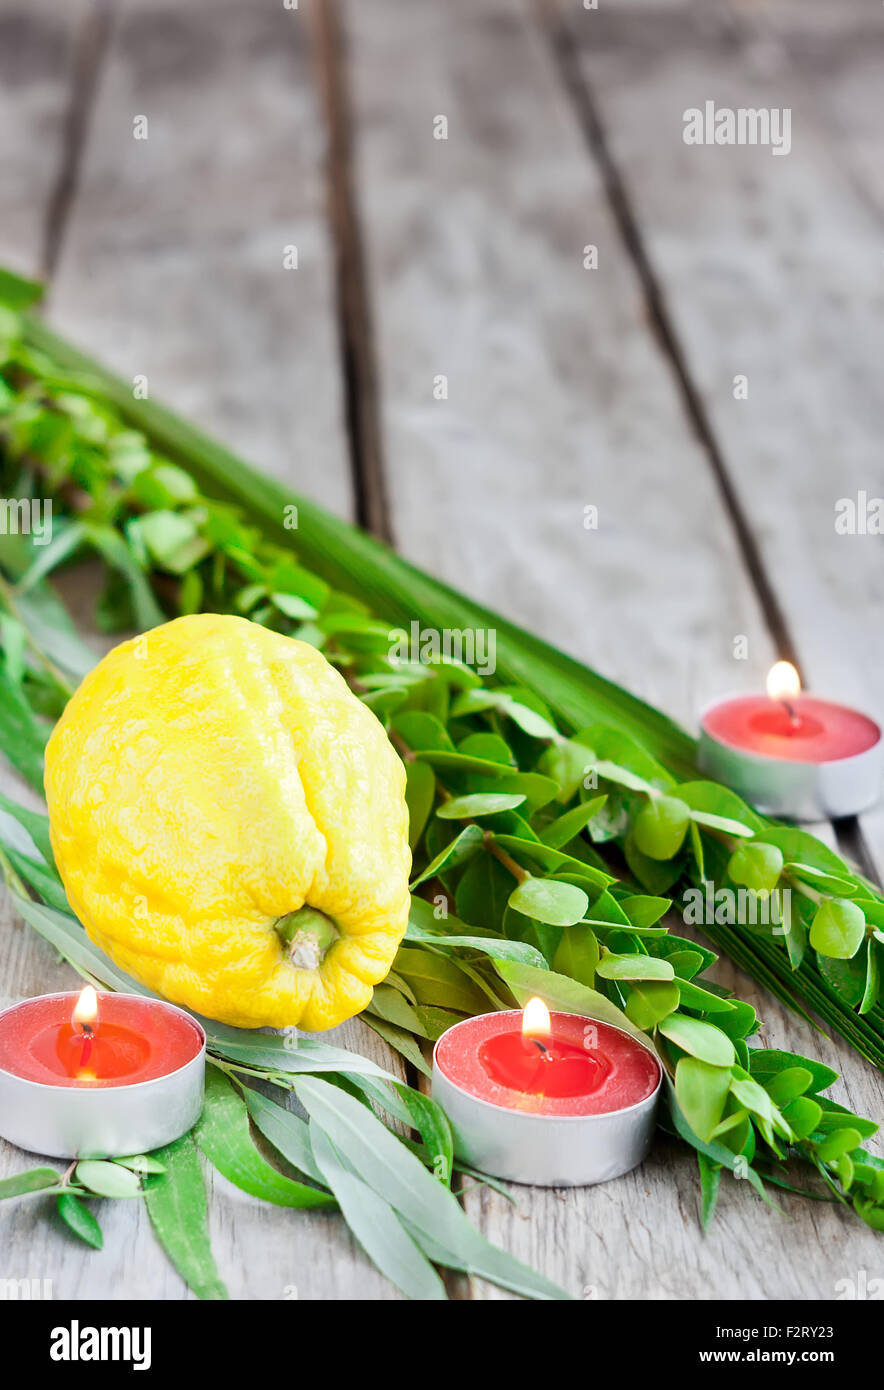 Symbols of jewish fall festival of Sukkot, lulav - etrog, palm branch, myrtle and willow - on old wooden background. Stock Photo